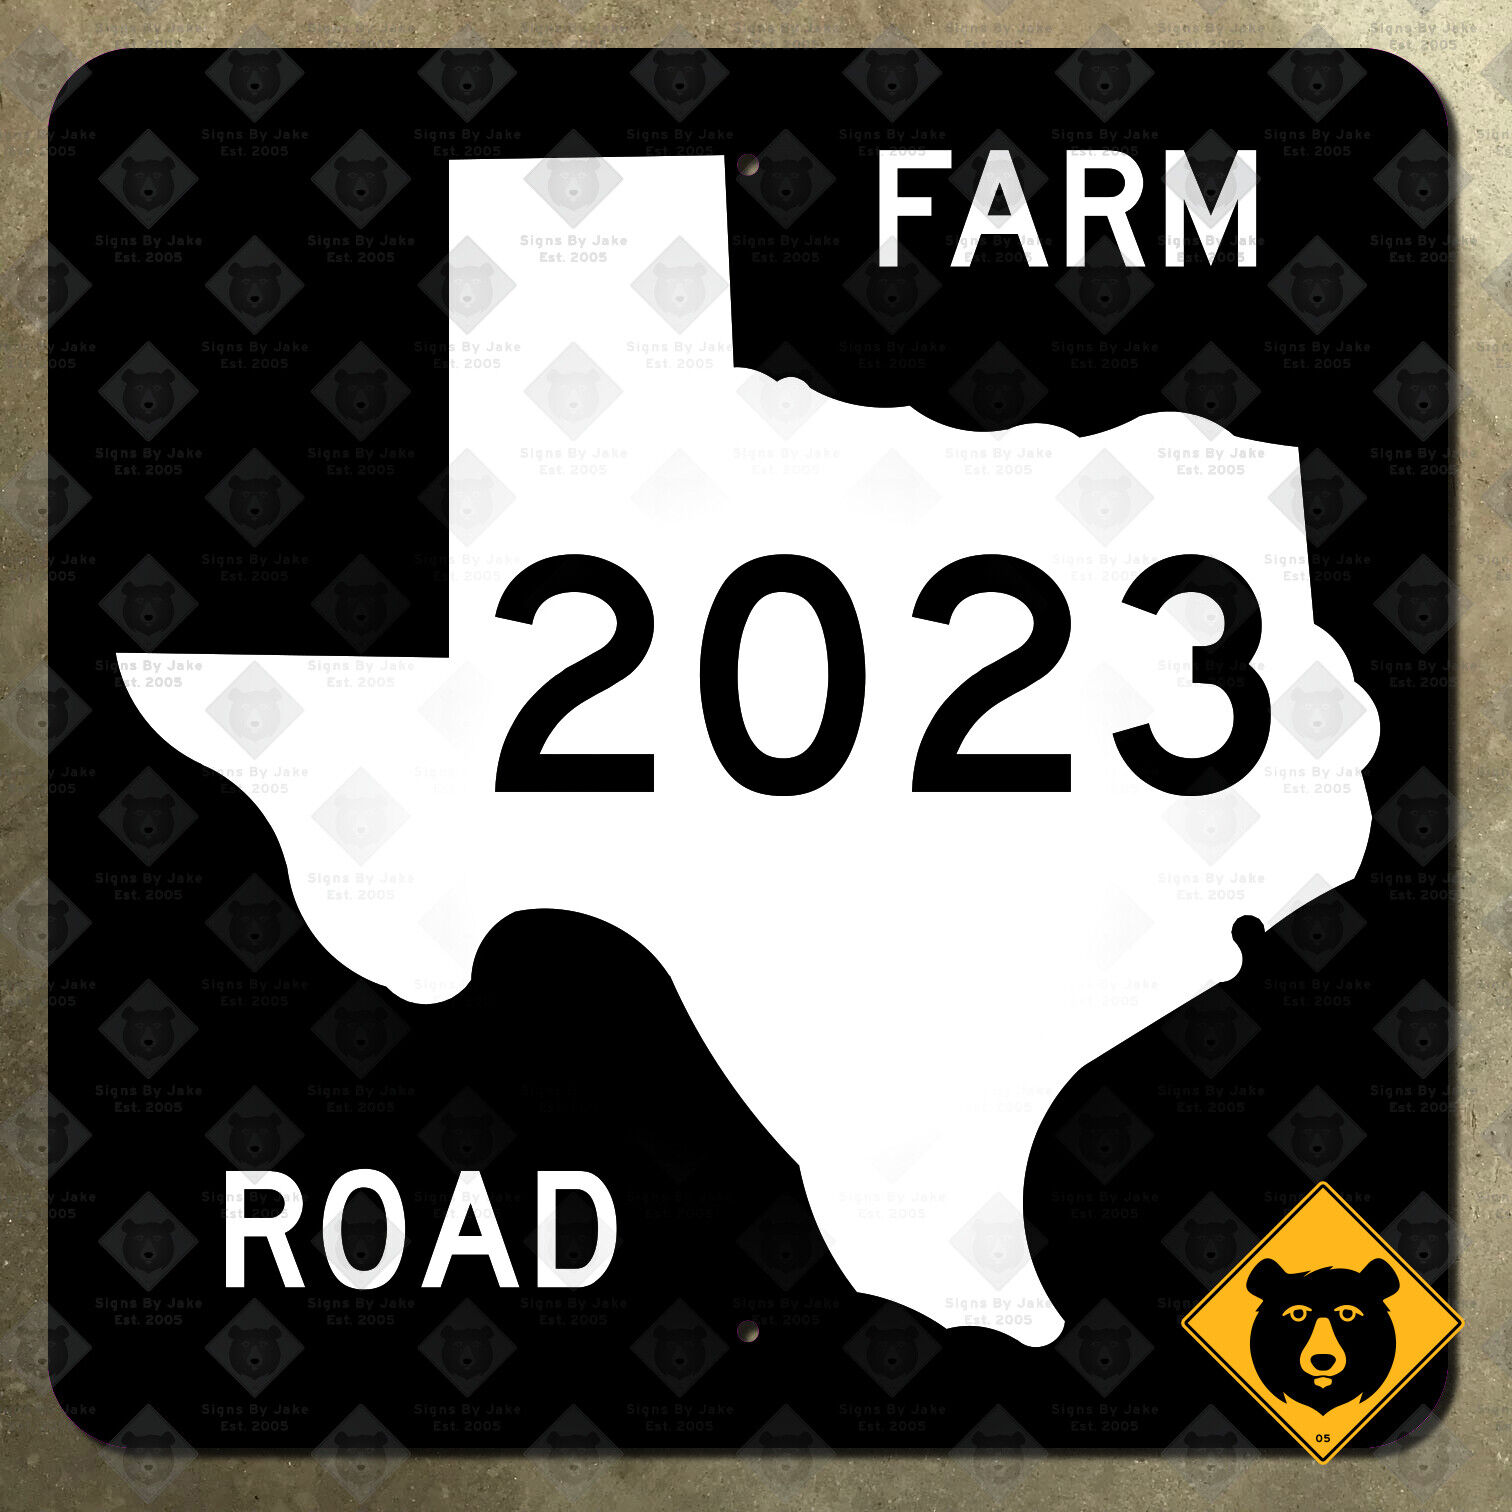 Texas Farm to Market Road 2023 route marker 1965 road sign US 59 Garrison 16x16